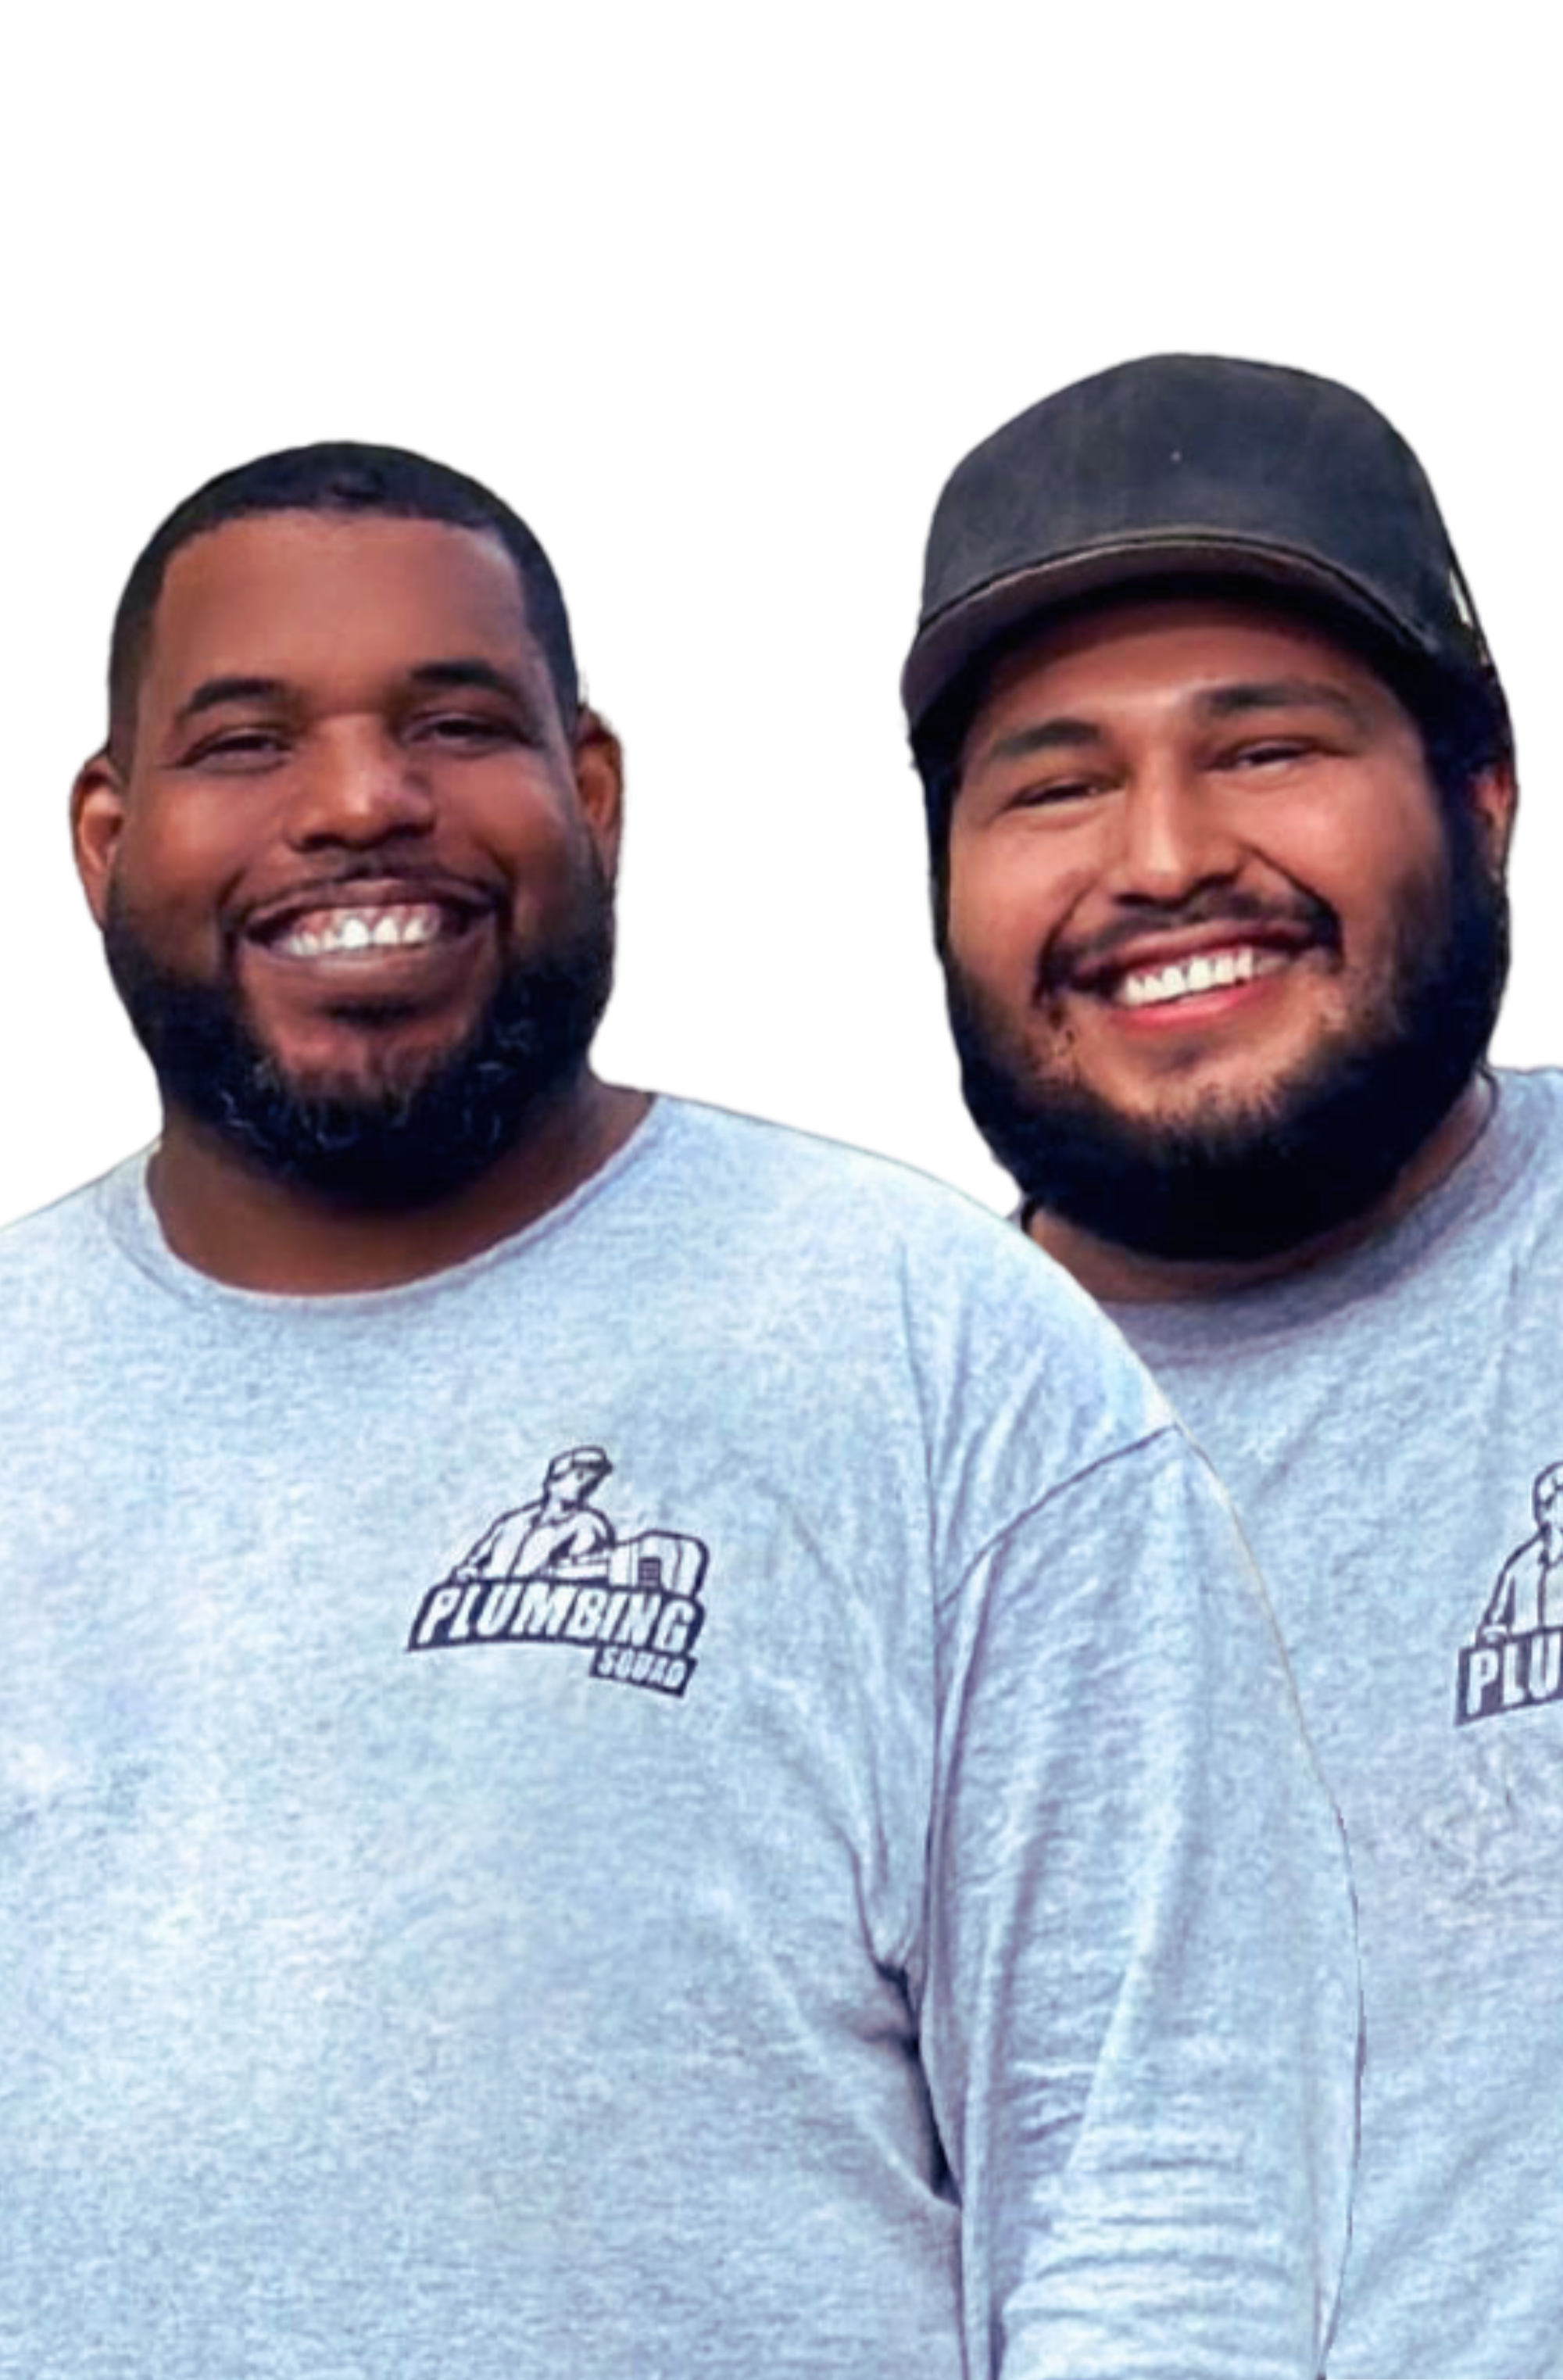 Two smiling plumbers in gray Plumbing Squad t-shirts standing side by side.